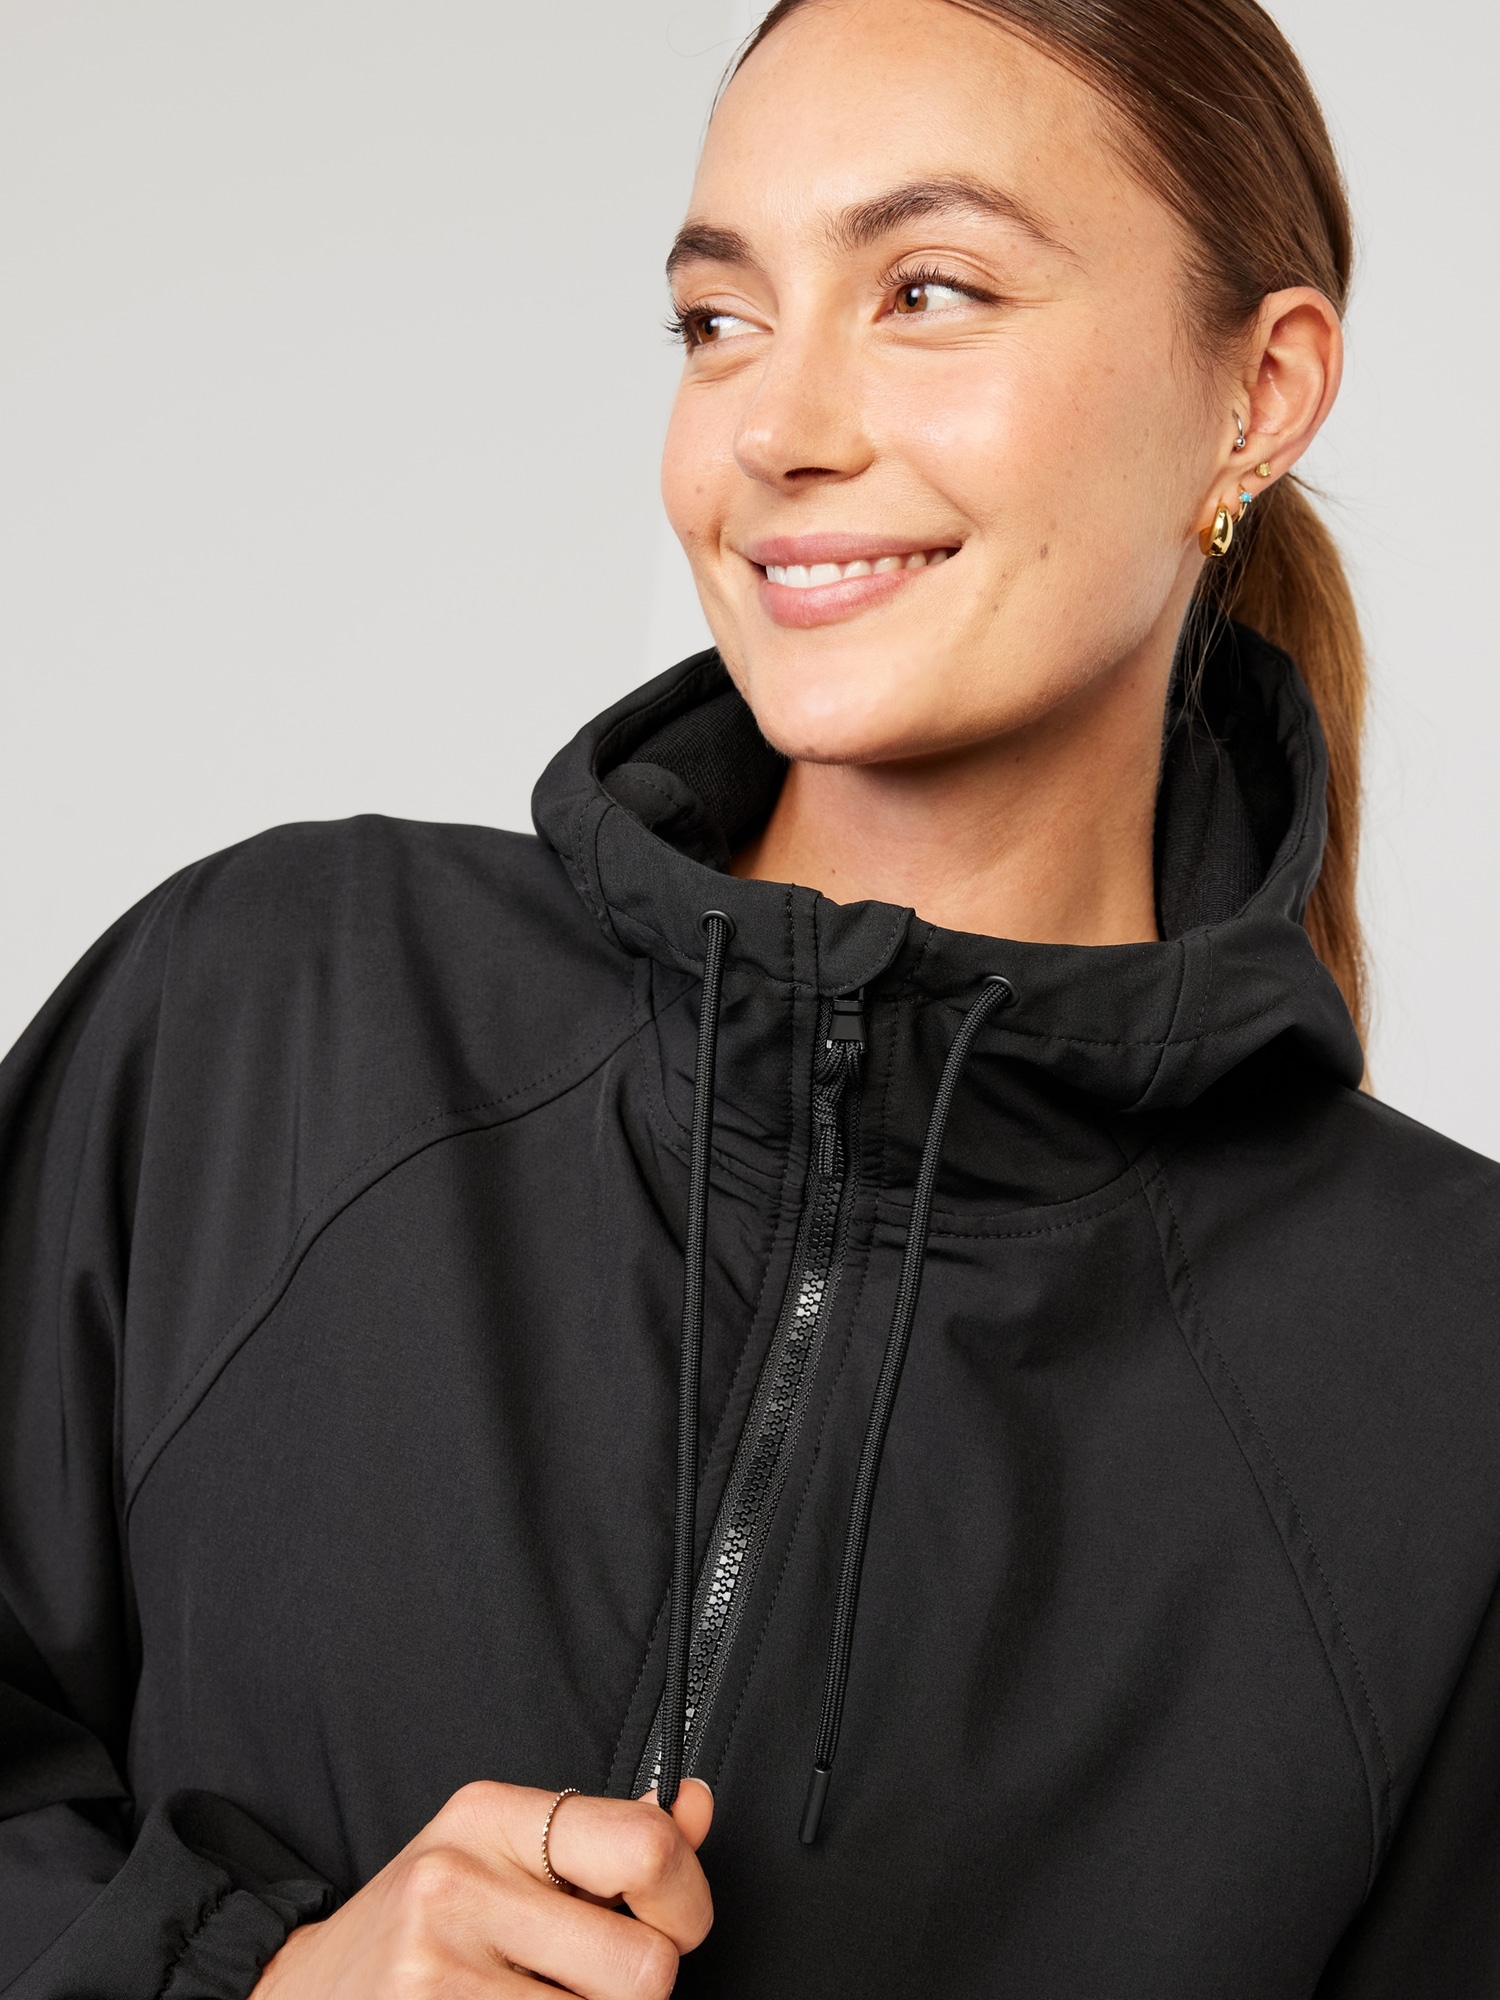 StretchTech Hooded Zip Jacket for Women | Old Navy